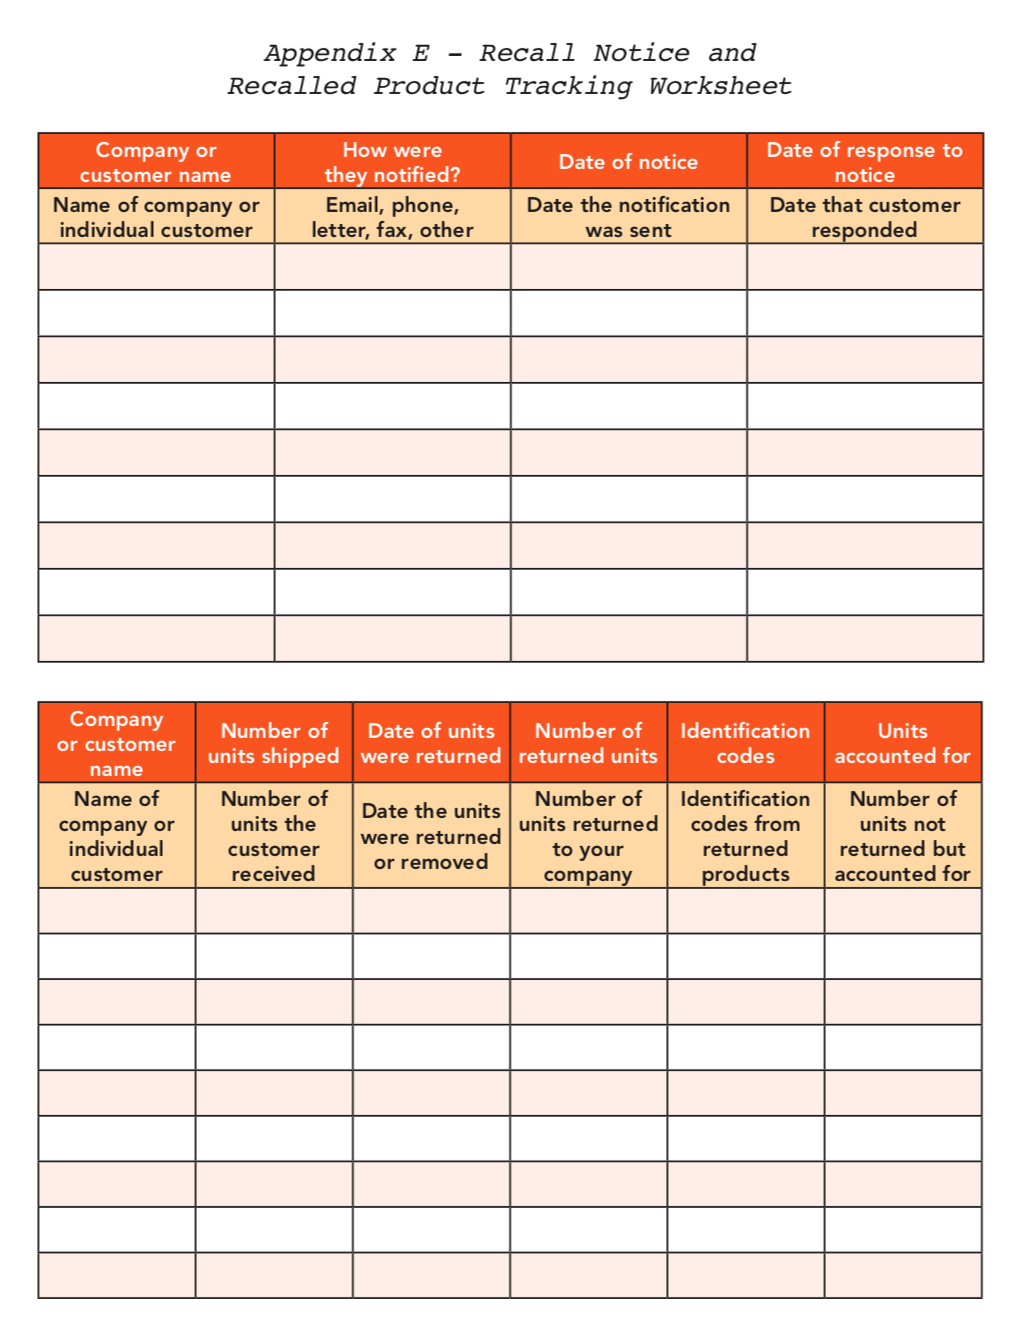 Recall notice and recalled product tracking worksheet. Tables of customers and response details, and customers and number of units.